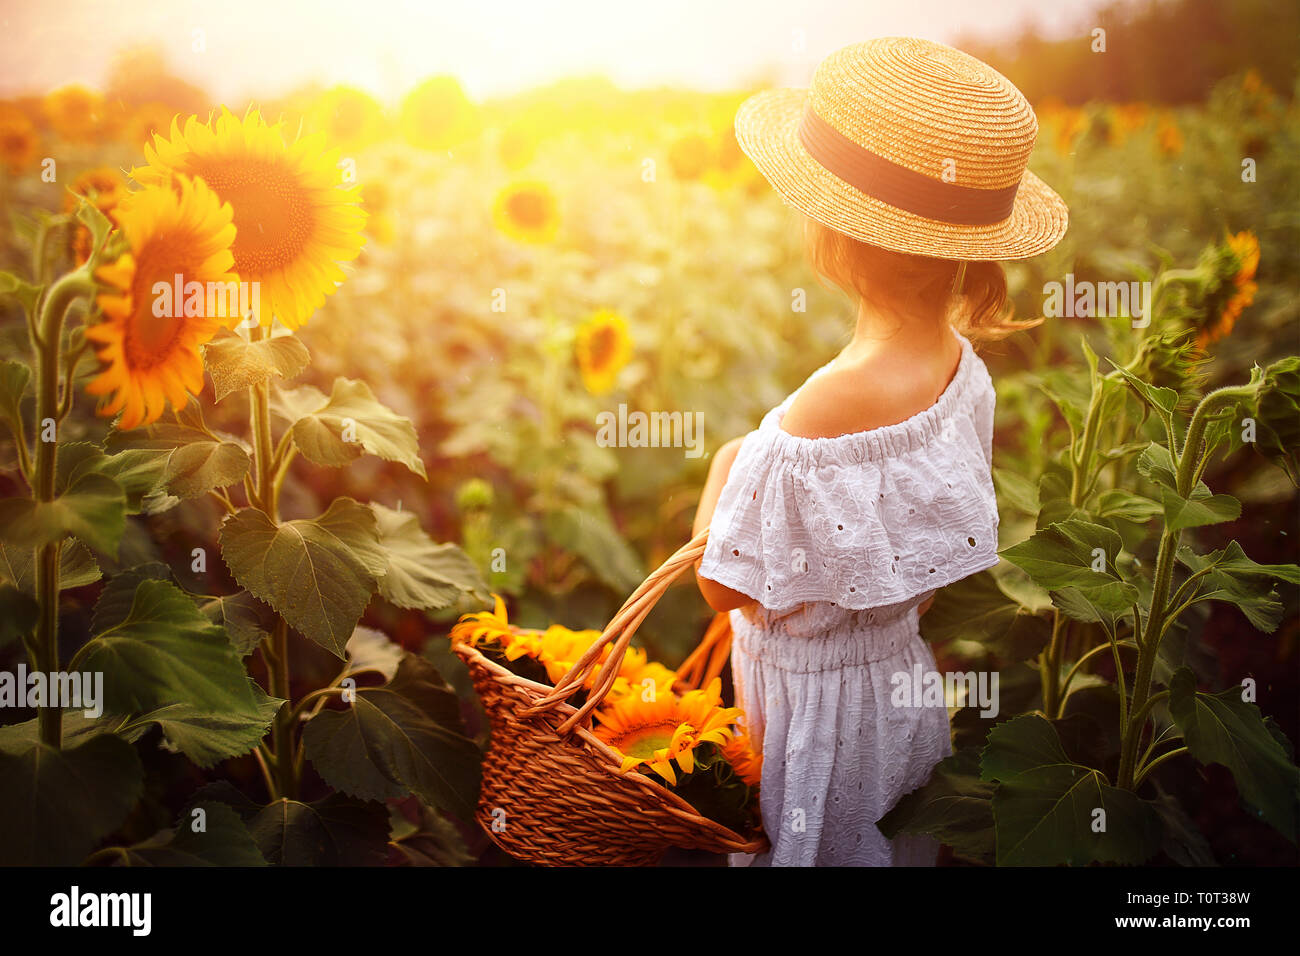 Portrait happy child girl in white dress, straw hat with a basket of sunflowers smiling and looking at camera. Sunny light playing on field. Family outdoor lifestyle. Summer cozy mood. Stock Photo